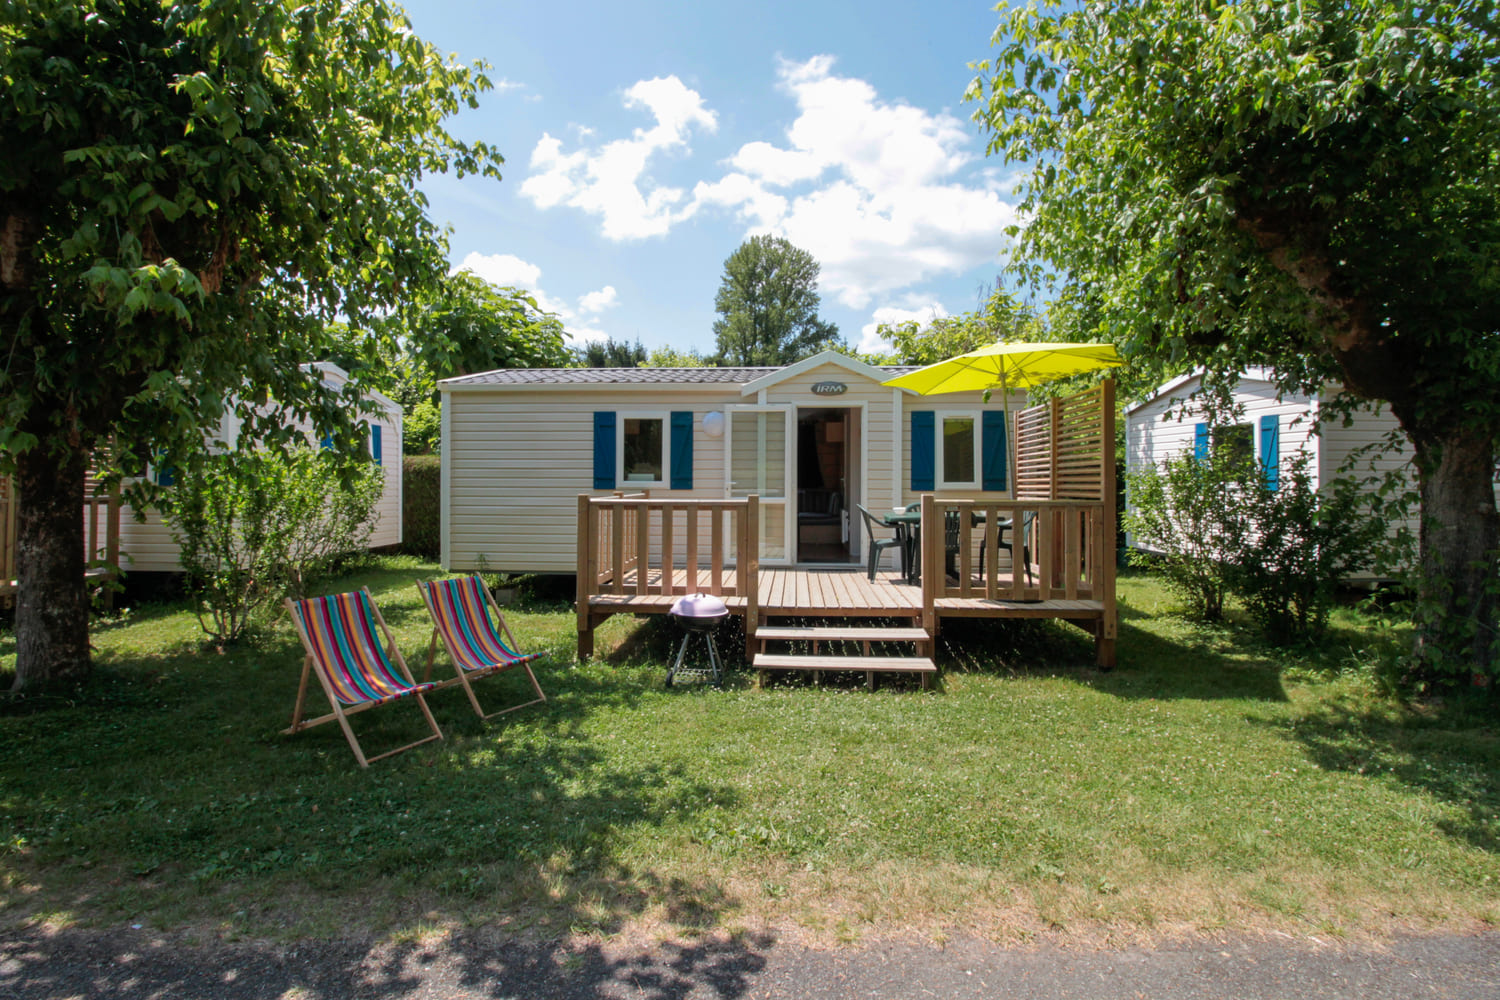 Mobile home rental in a campsite in Périgord on the banks of the Dordogne IRM Mercure 26 - 27